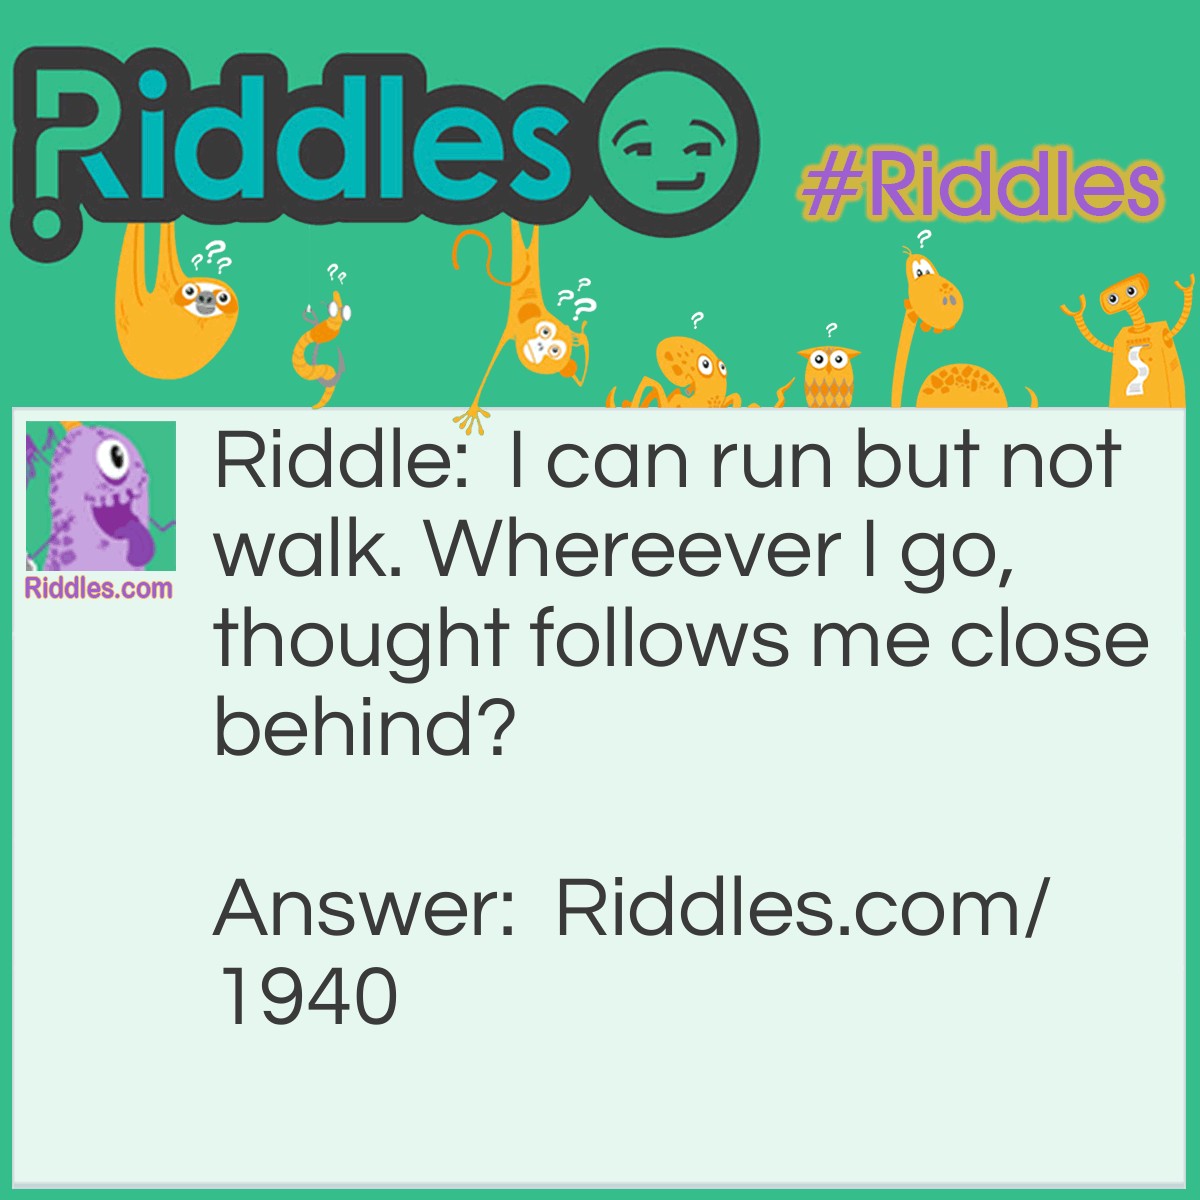 Riddle: I can run but not walk. Whereever I go, thought follows me close behind? Answer: A nose.